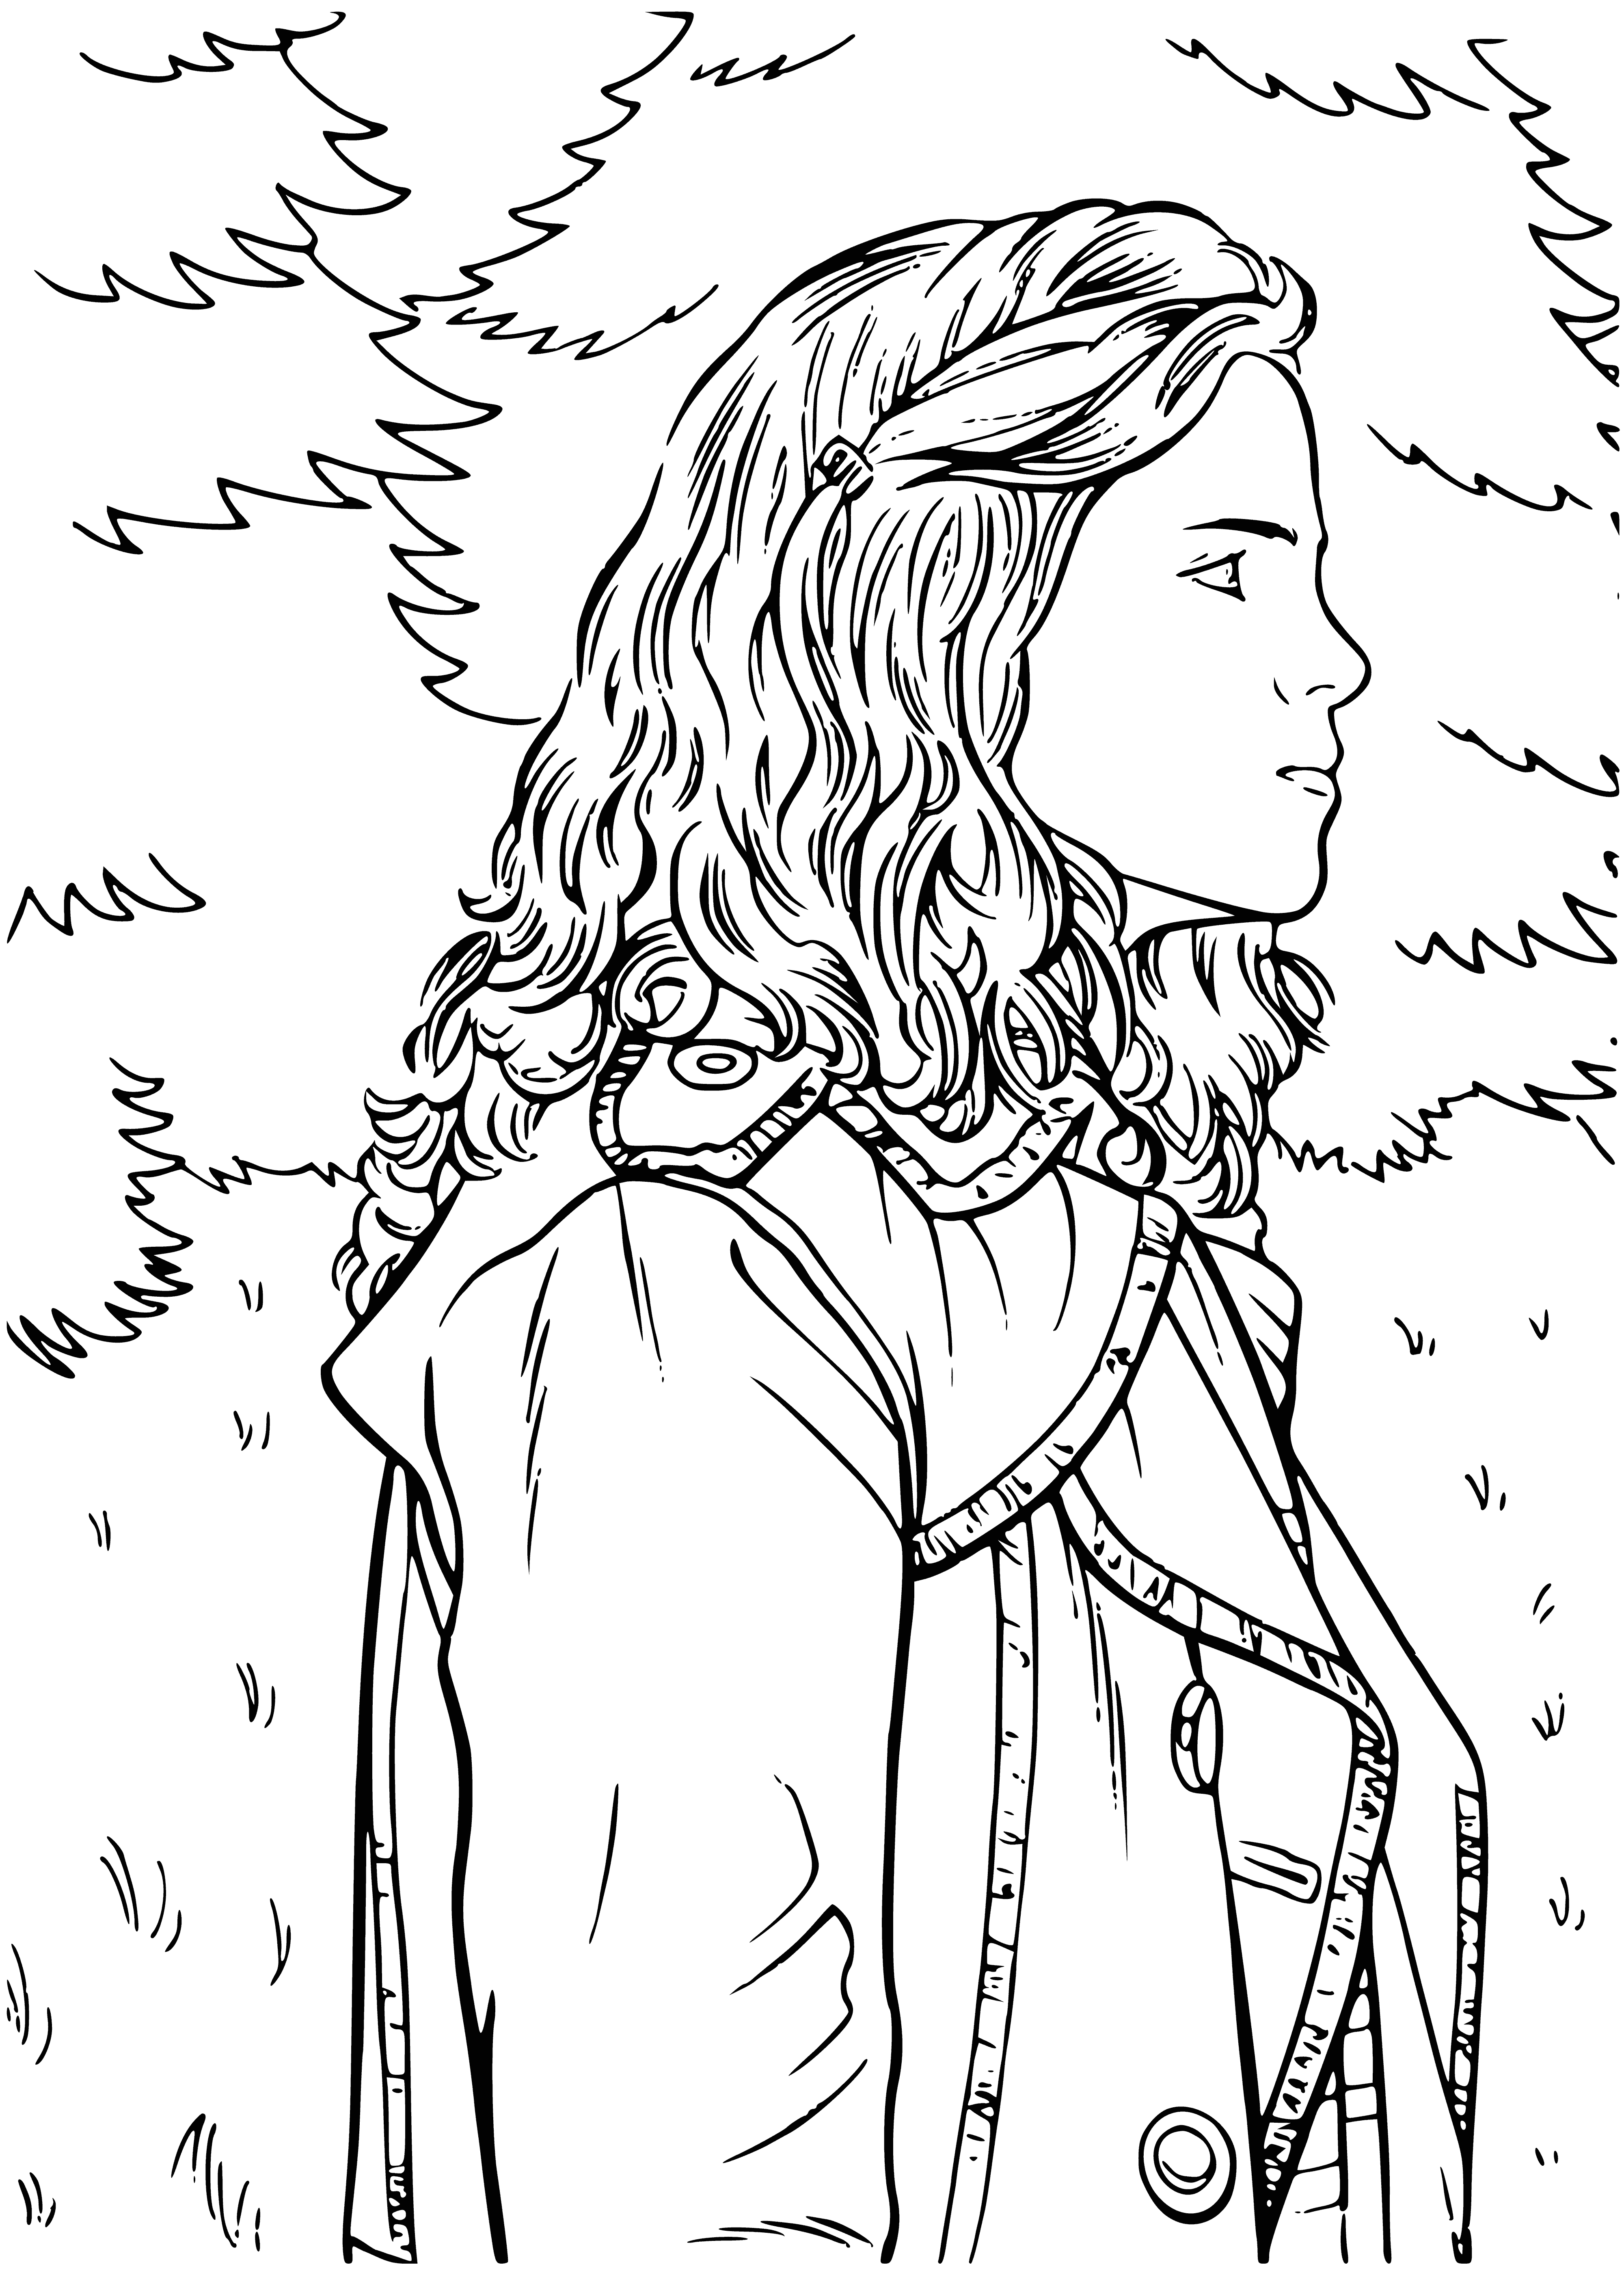 coloring page: Harry & Hermione determined, hands clasped, intense gaze; mysterious haze behind them. #friendship #harrypotter